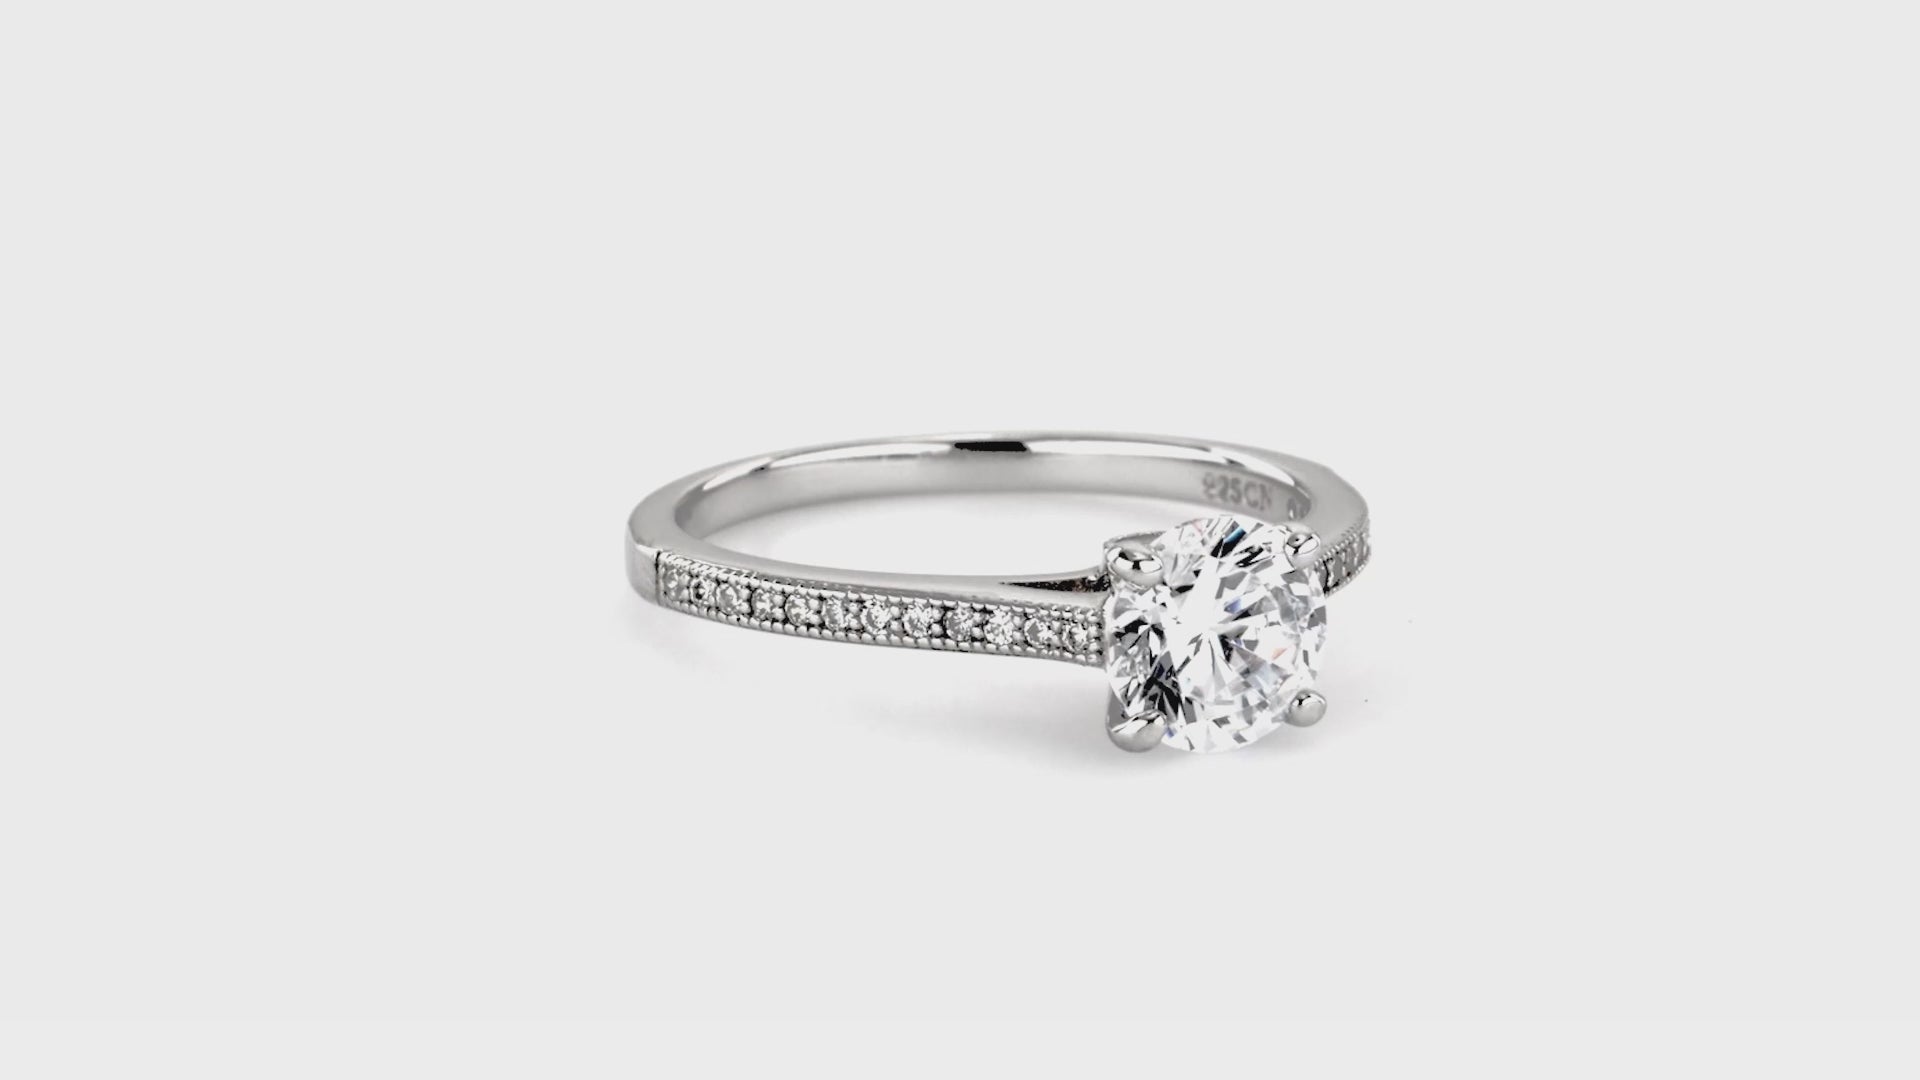 Video Contains Solitaire 1ct Round CZ Ring in Sterling Silver. Style Number R821